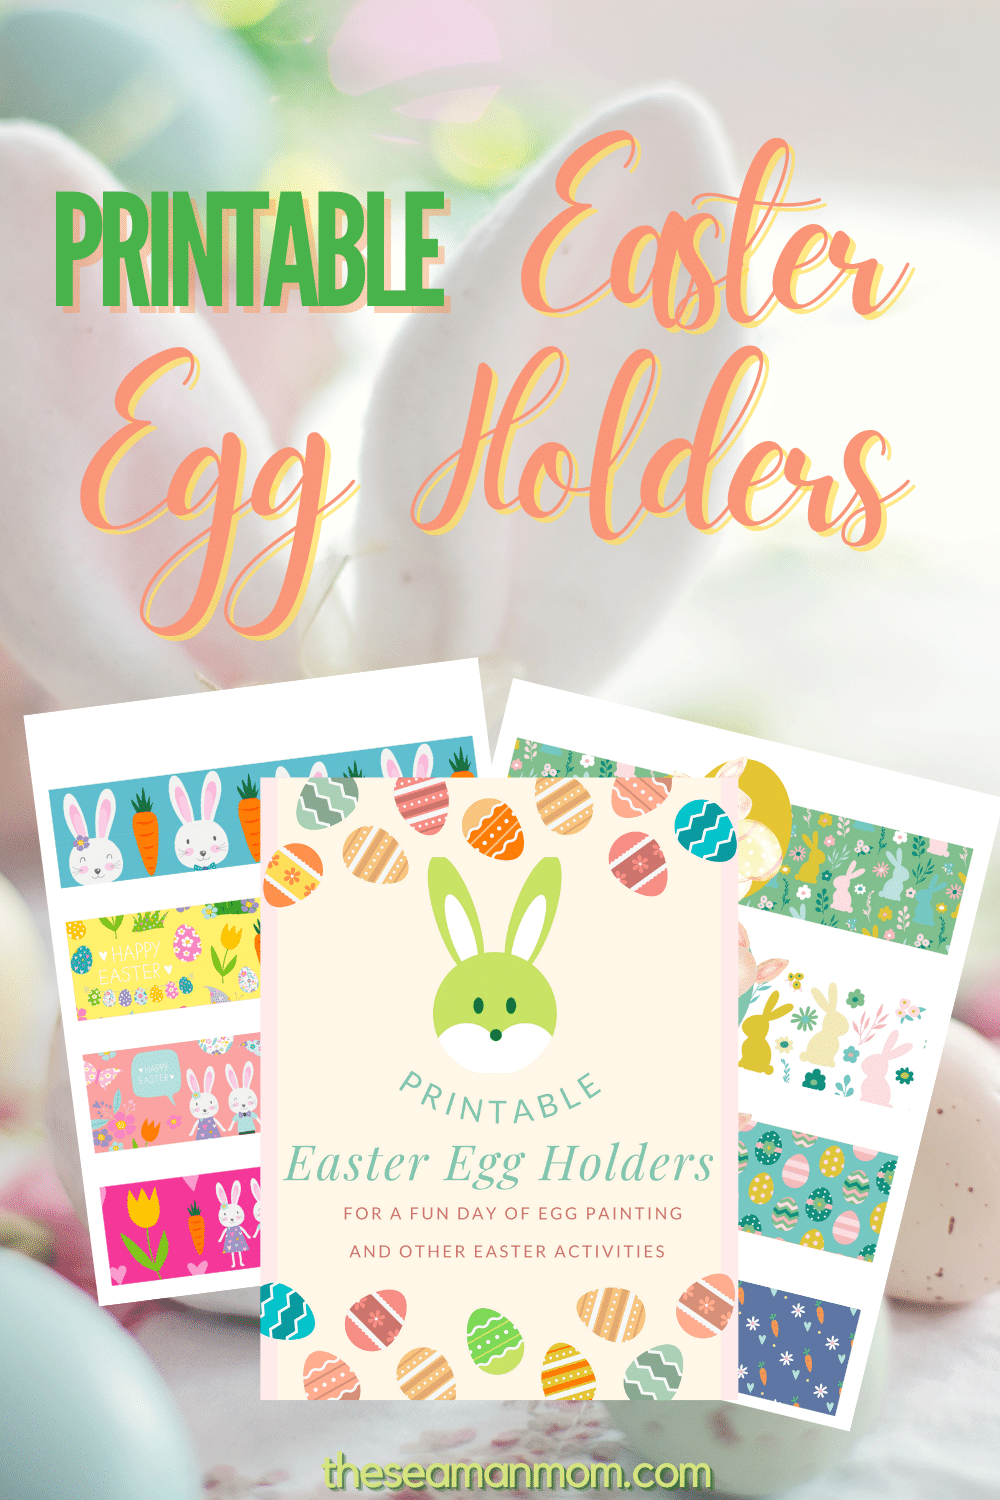 These Easter egg holders are so cute you’ll want to grab them asap!